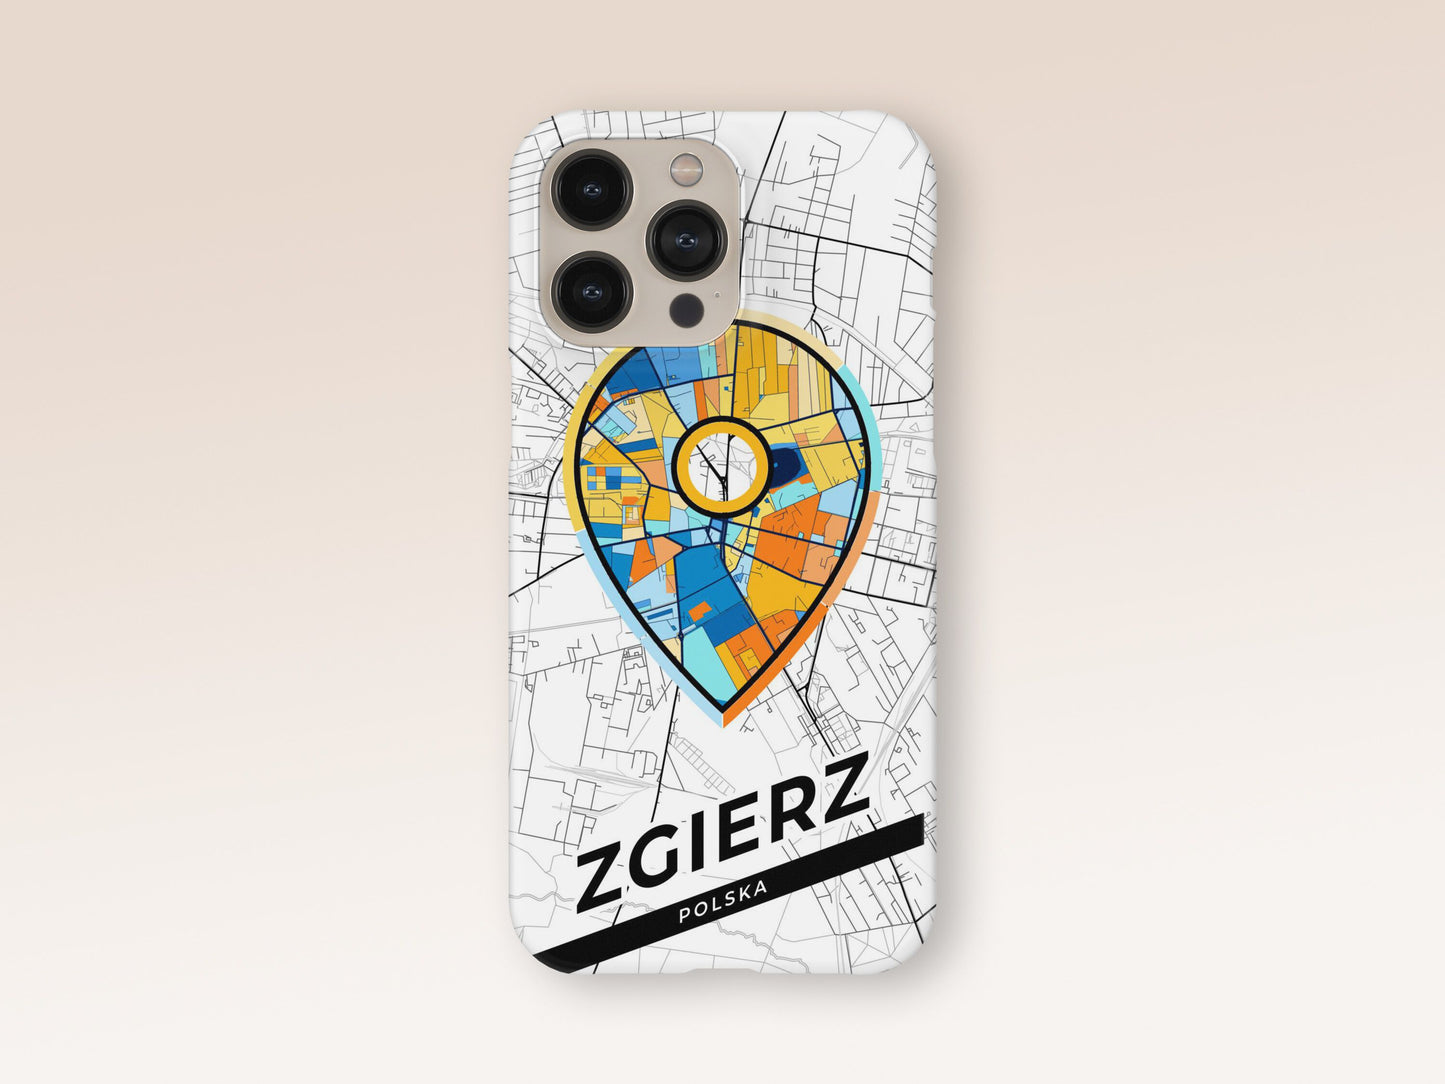 Zgierz Poland slim phone case with colorful icon 1